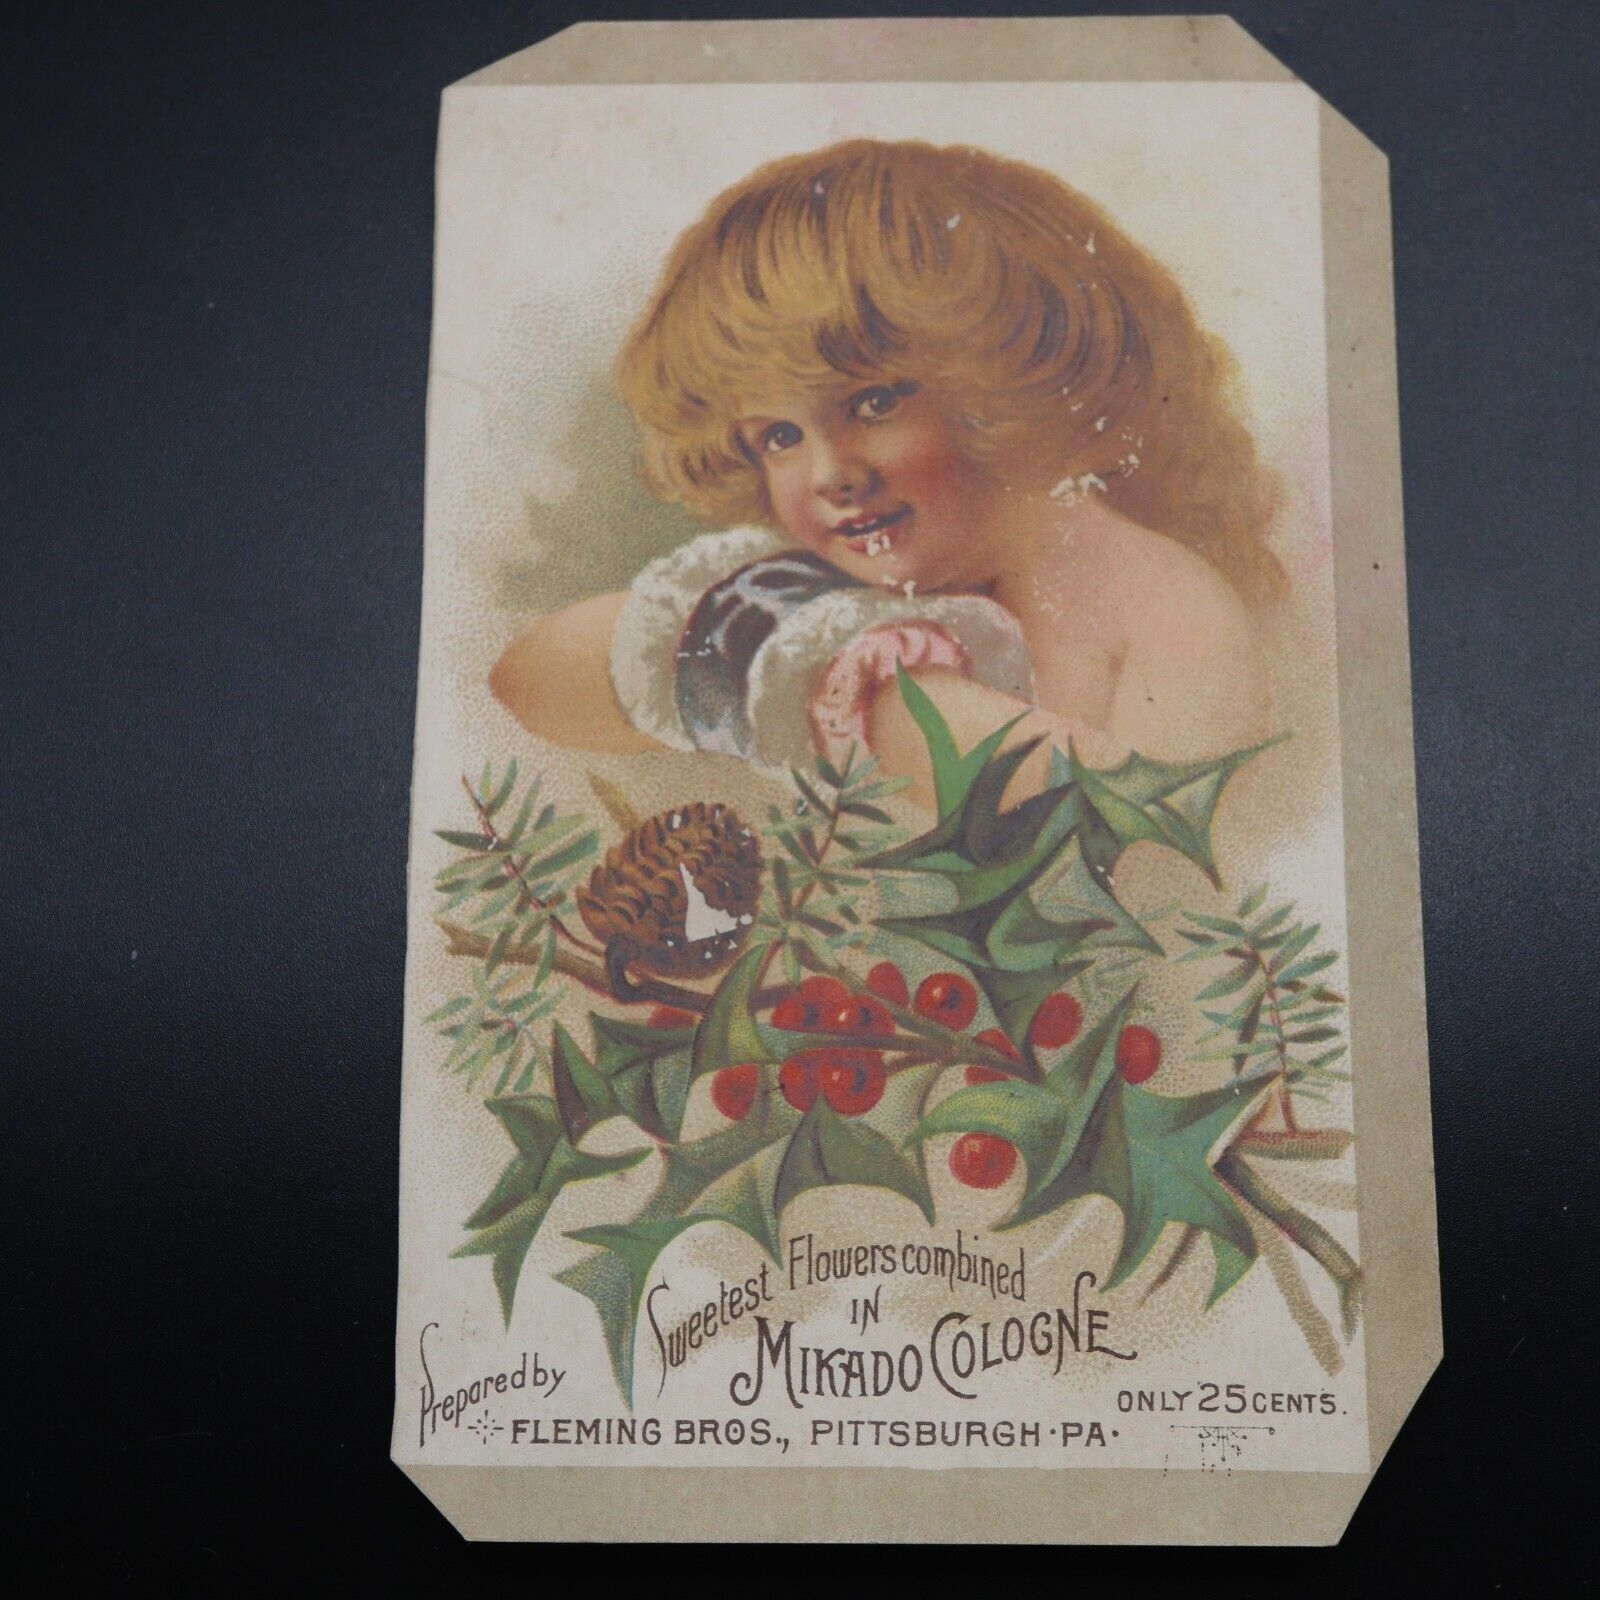 ANTIQUE 1800'S ADVERTISING TRADE CARD MIKADO COLOGNE FLEMING BROS. PITTSBURGH